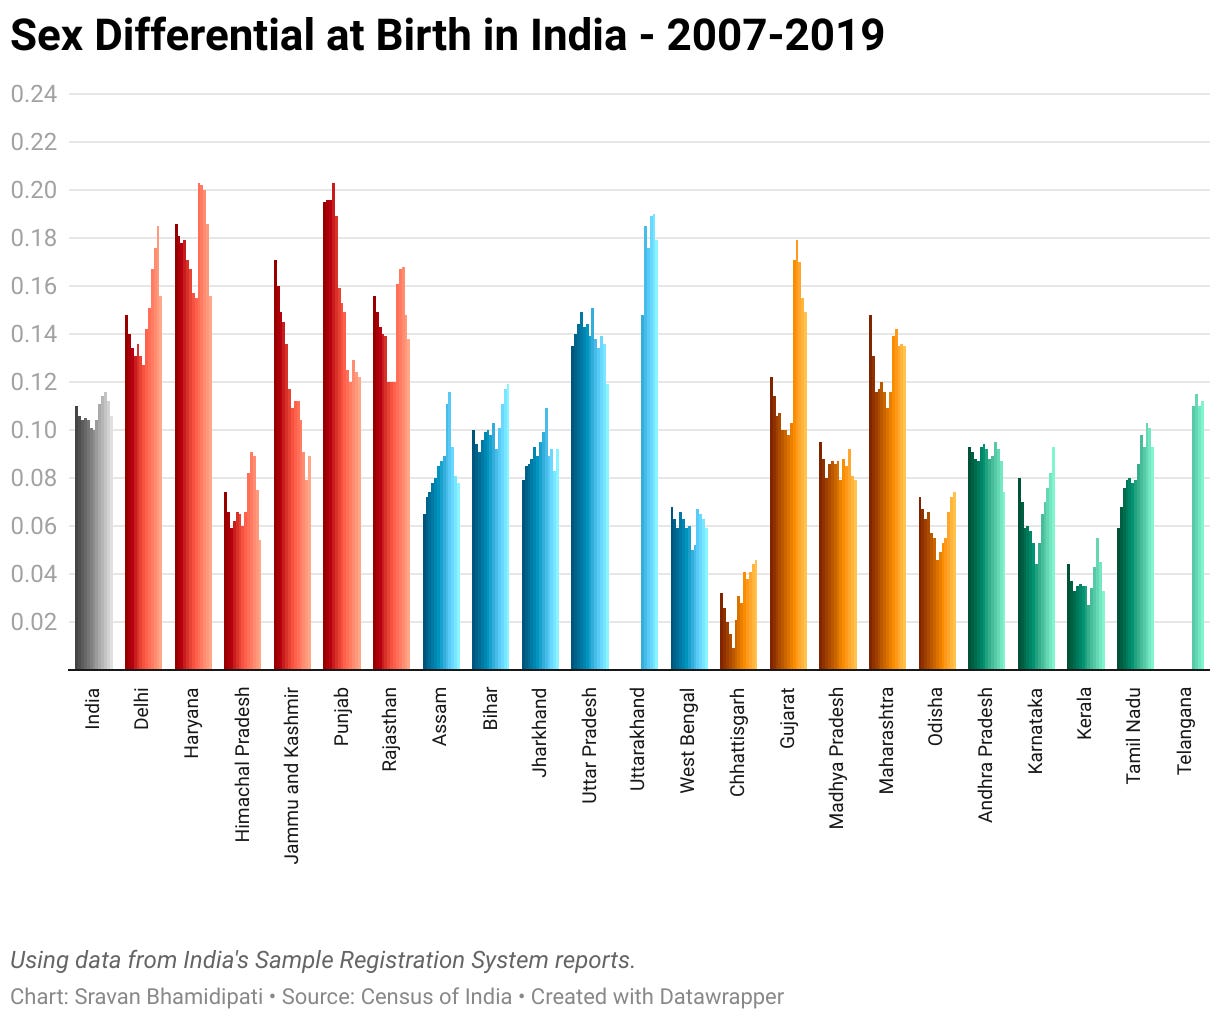 Statewise breakdown of sex differential at birth in India, from 2007 to 2019